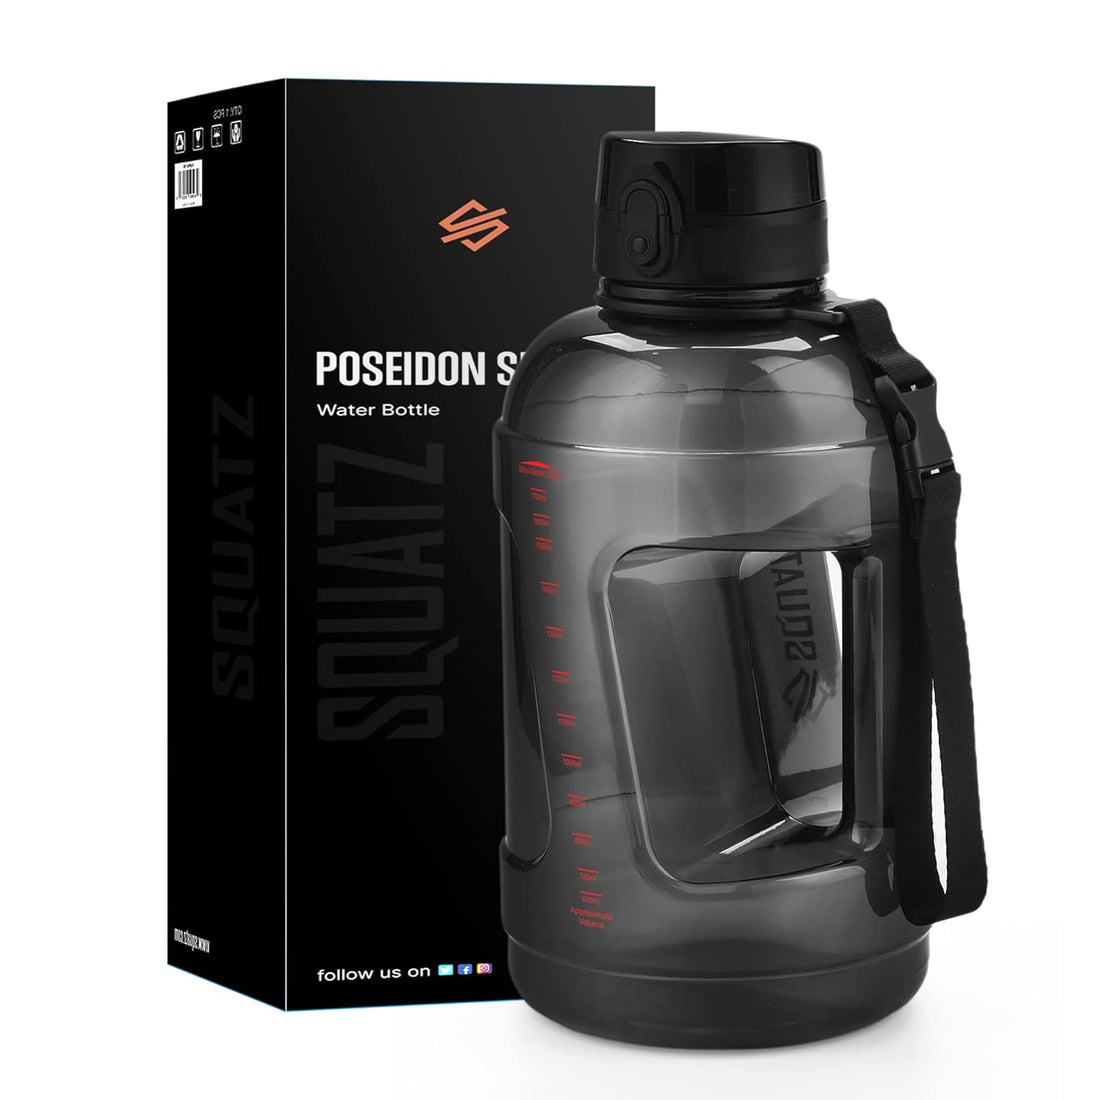 SQUATZ 78 Oz Poseidon Water Bottle Series (Black) - Sports Big Volume Wide Mouth Opening, Anti-Slip Handle, Fall-Proof Cap, Fixed Buckle Carrying Strap, Leak Proof & Zero Condensation Jag